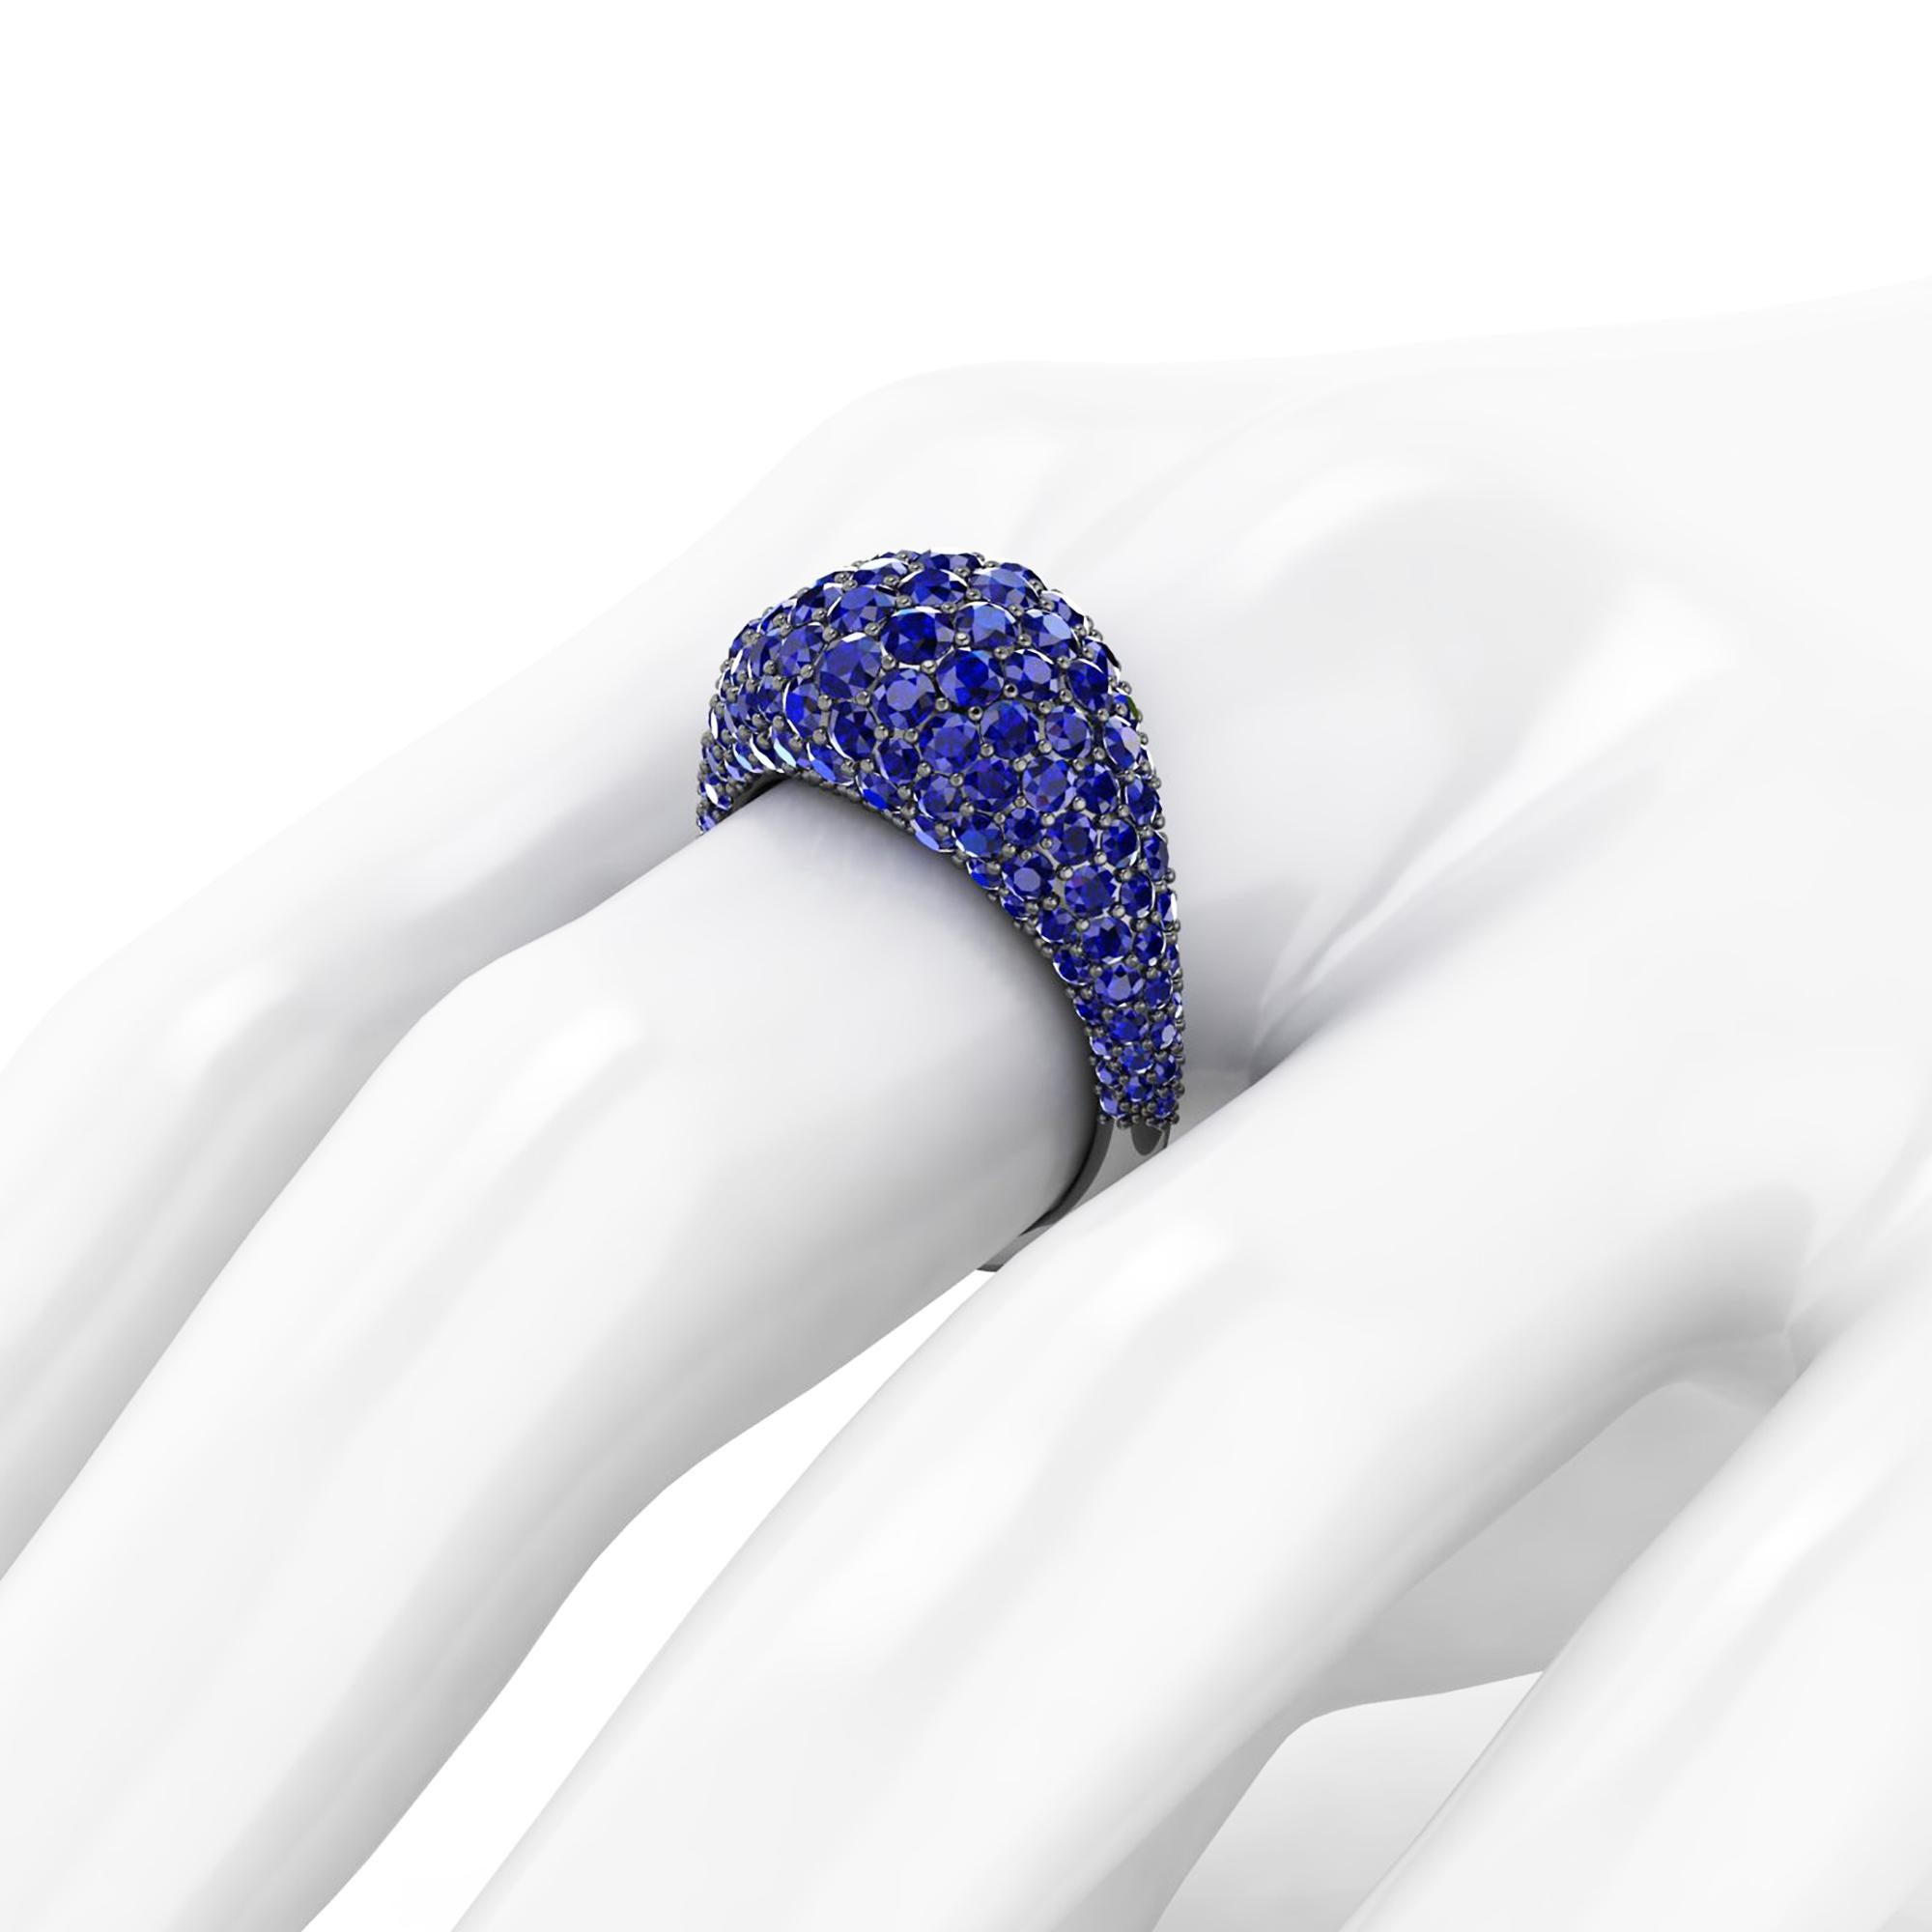 Dome, blue sapphires organic ring, with a slightly dome feeling, a wrap of sparkling, intense, blue sapphires, for an approximate sapphire's total carat weight of 2.60 carats, hand made in New York City by hand by  Italian master jeweler, conceived